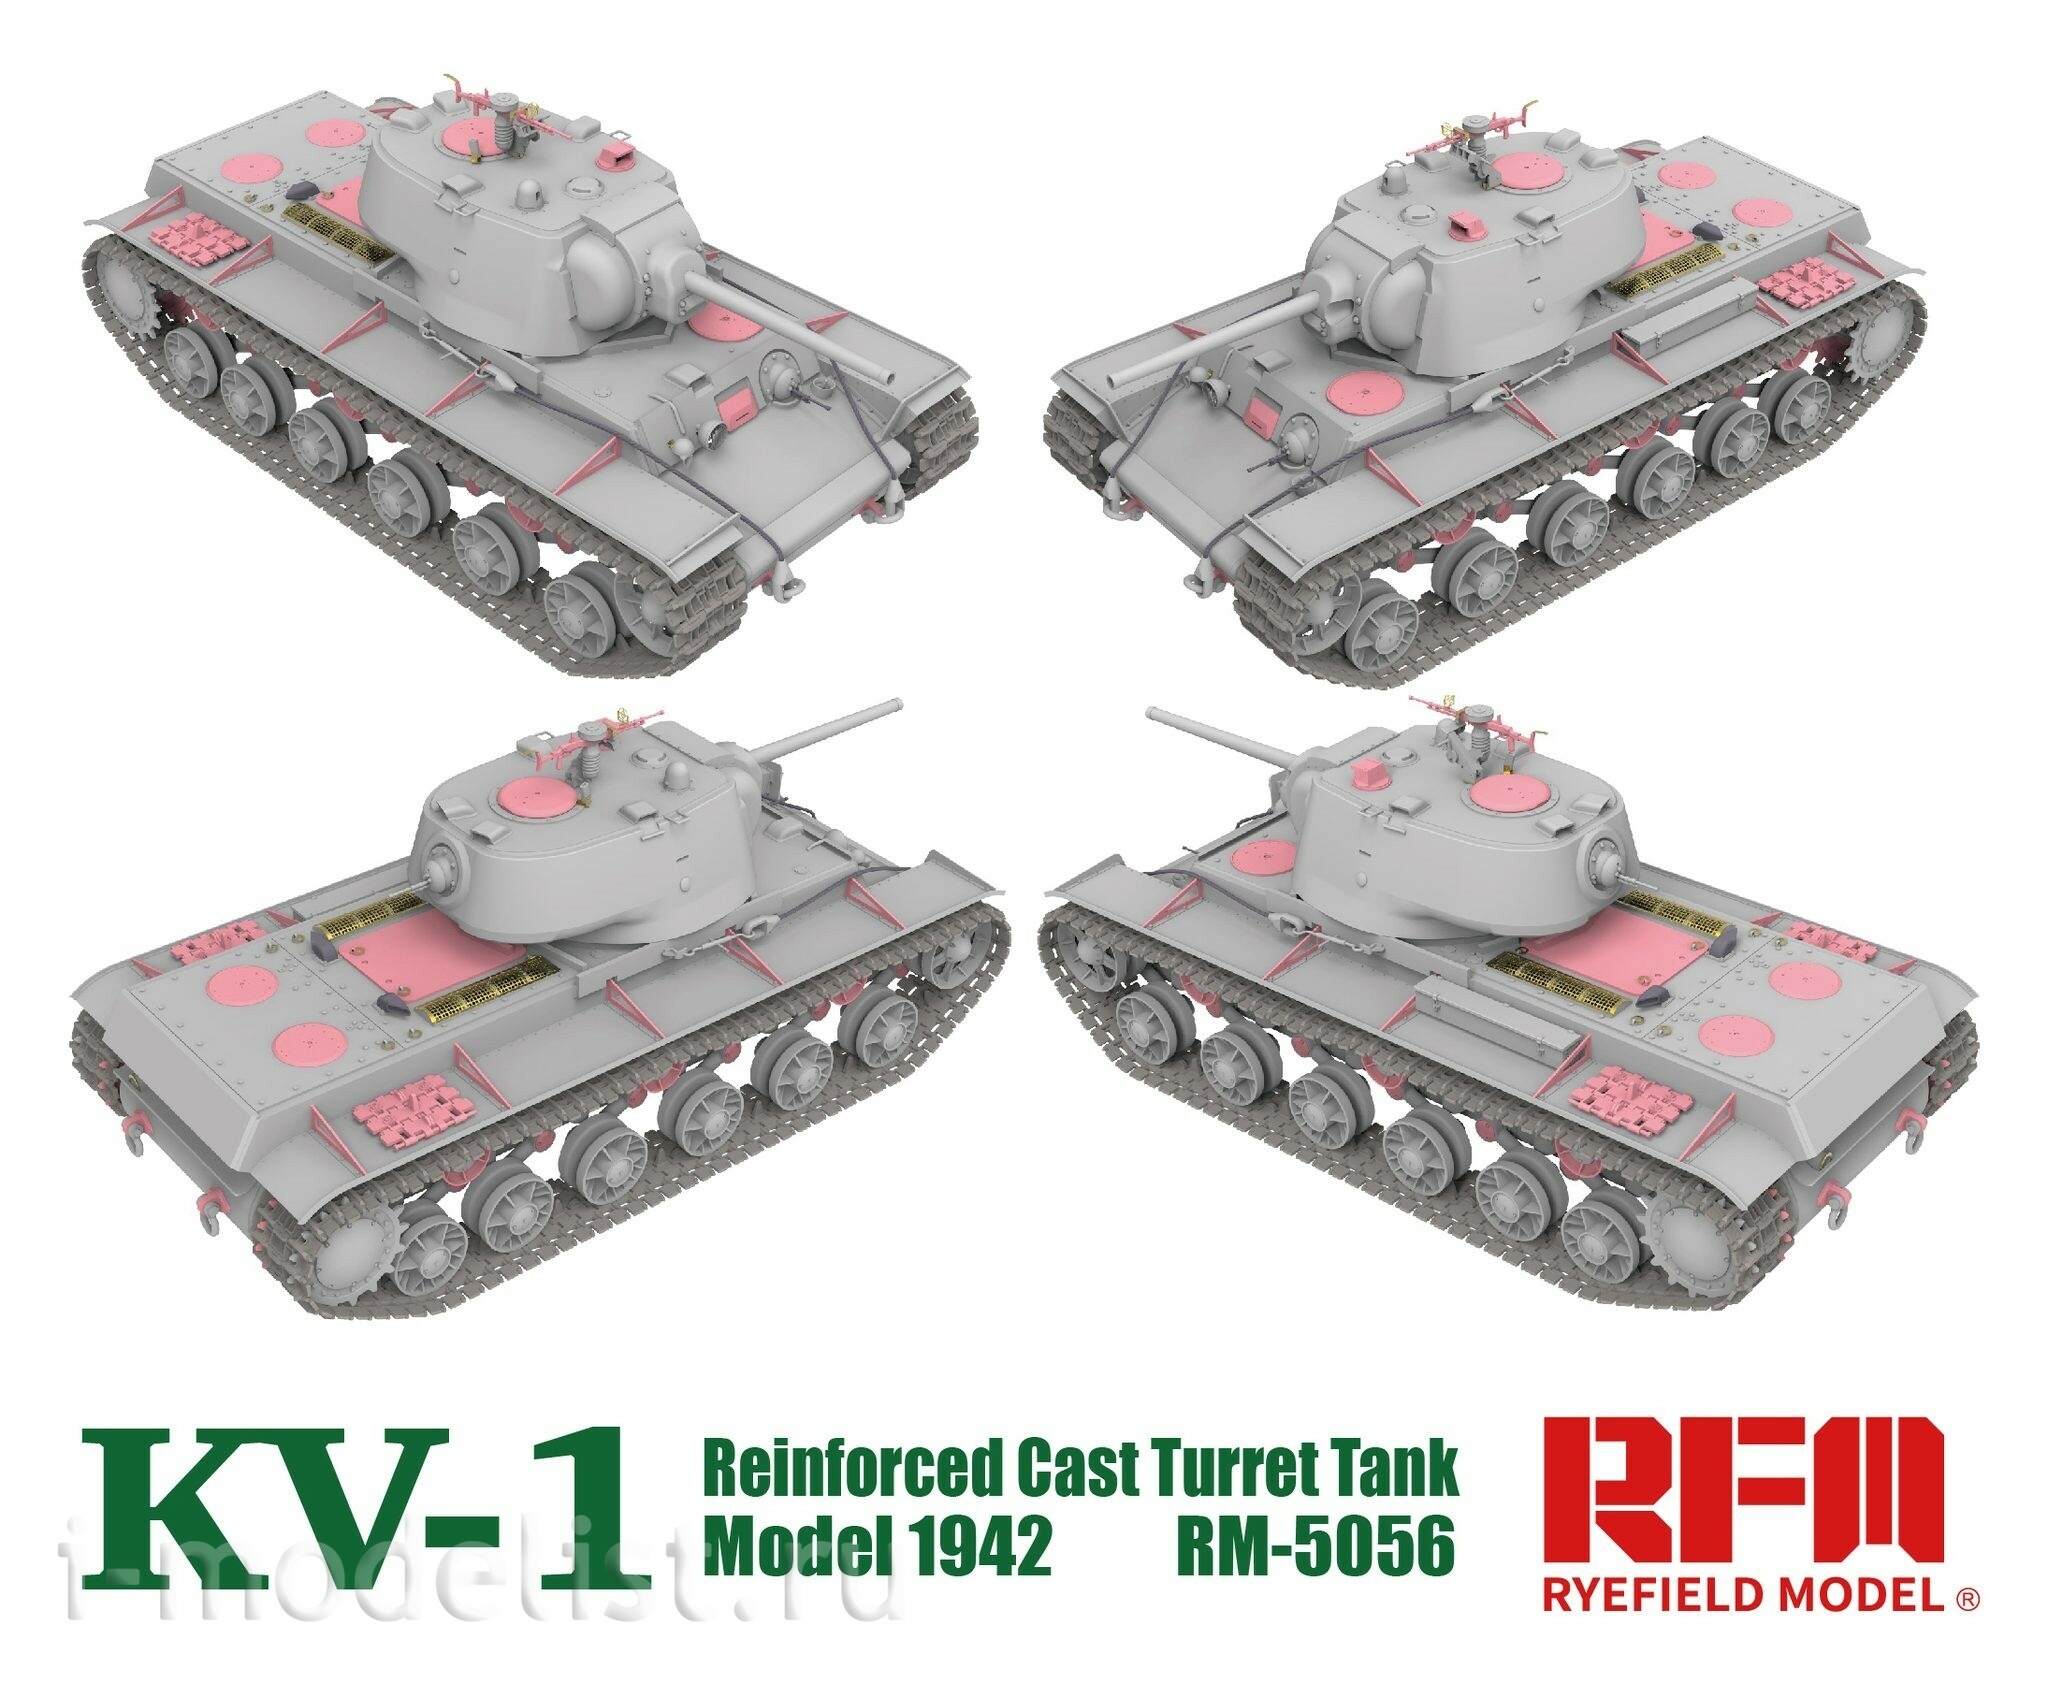 RM-5056 Rye Field Model 1/35 KV-1 tank with reinforced cast turret mod.1942 (with working tracks)